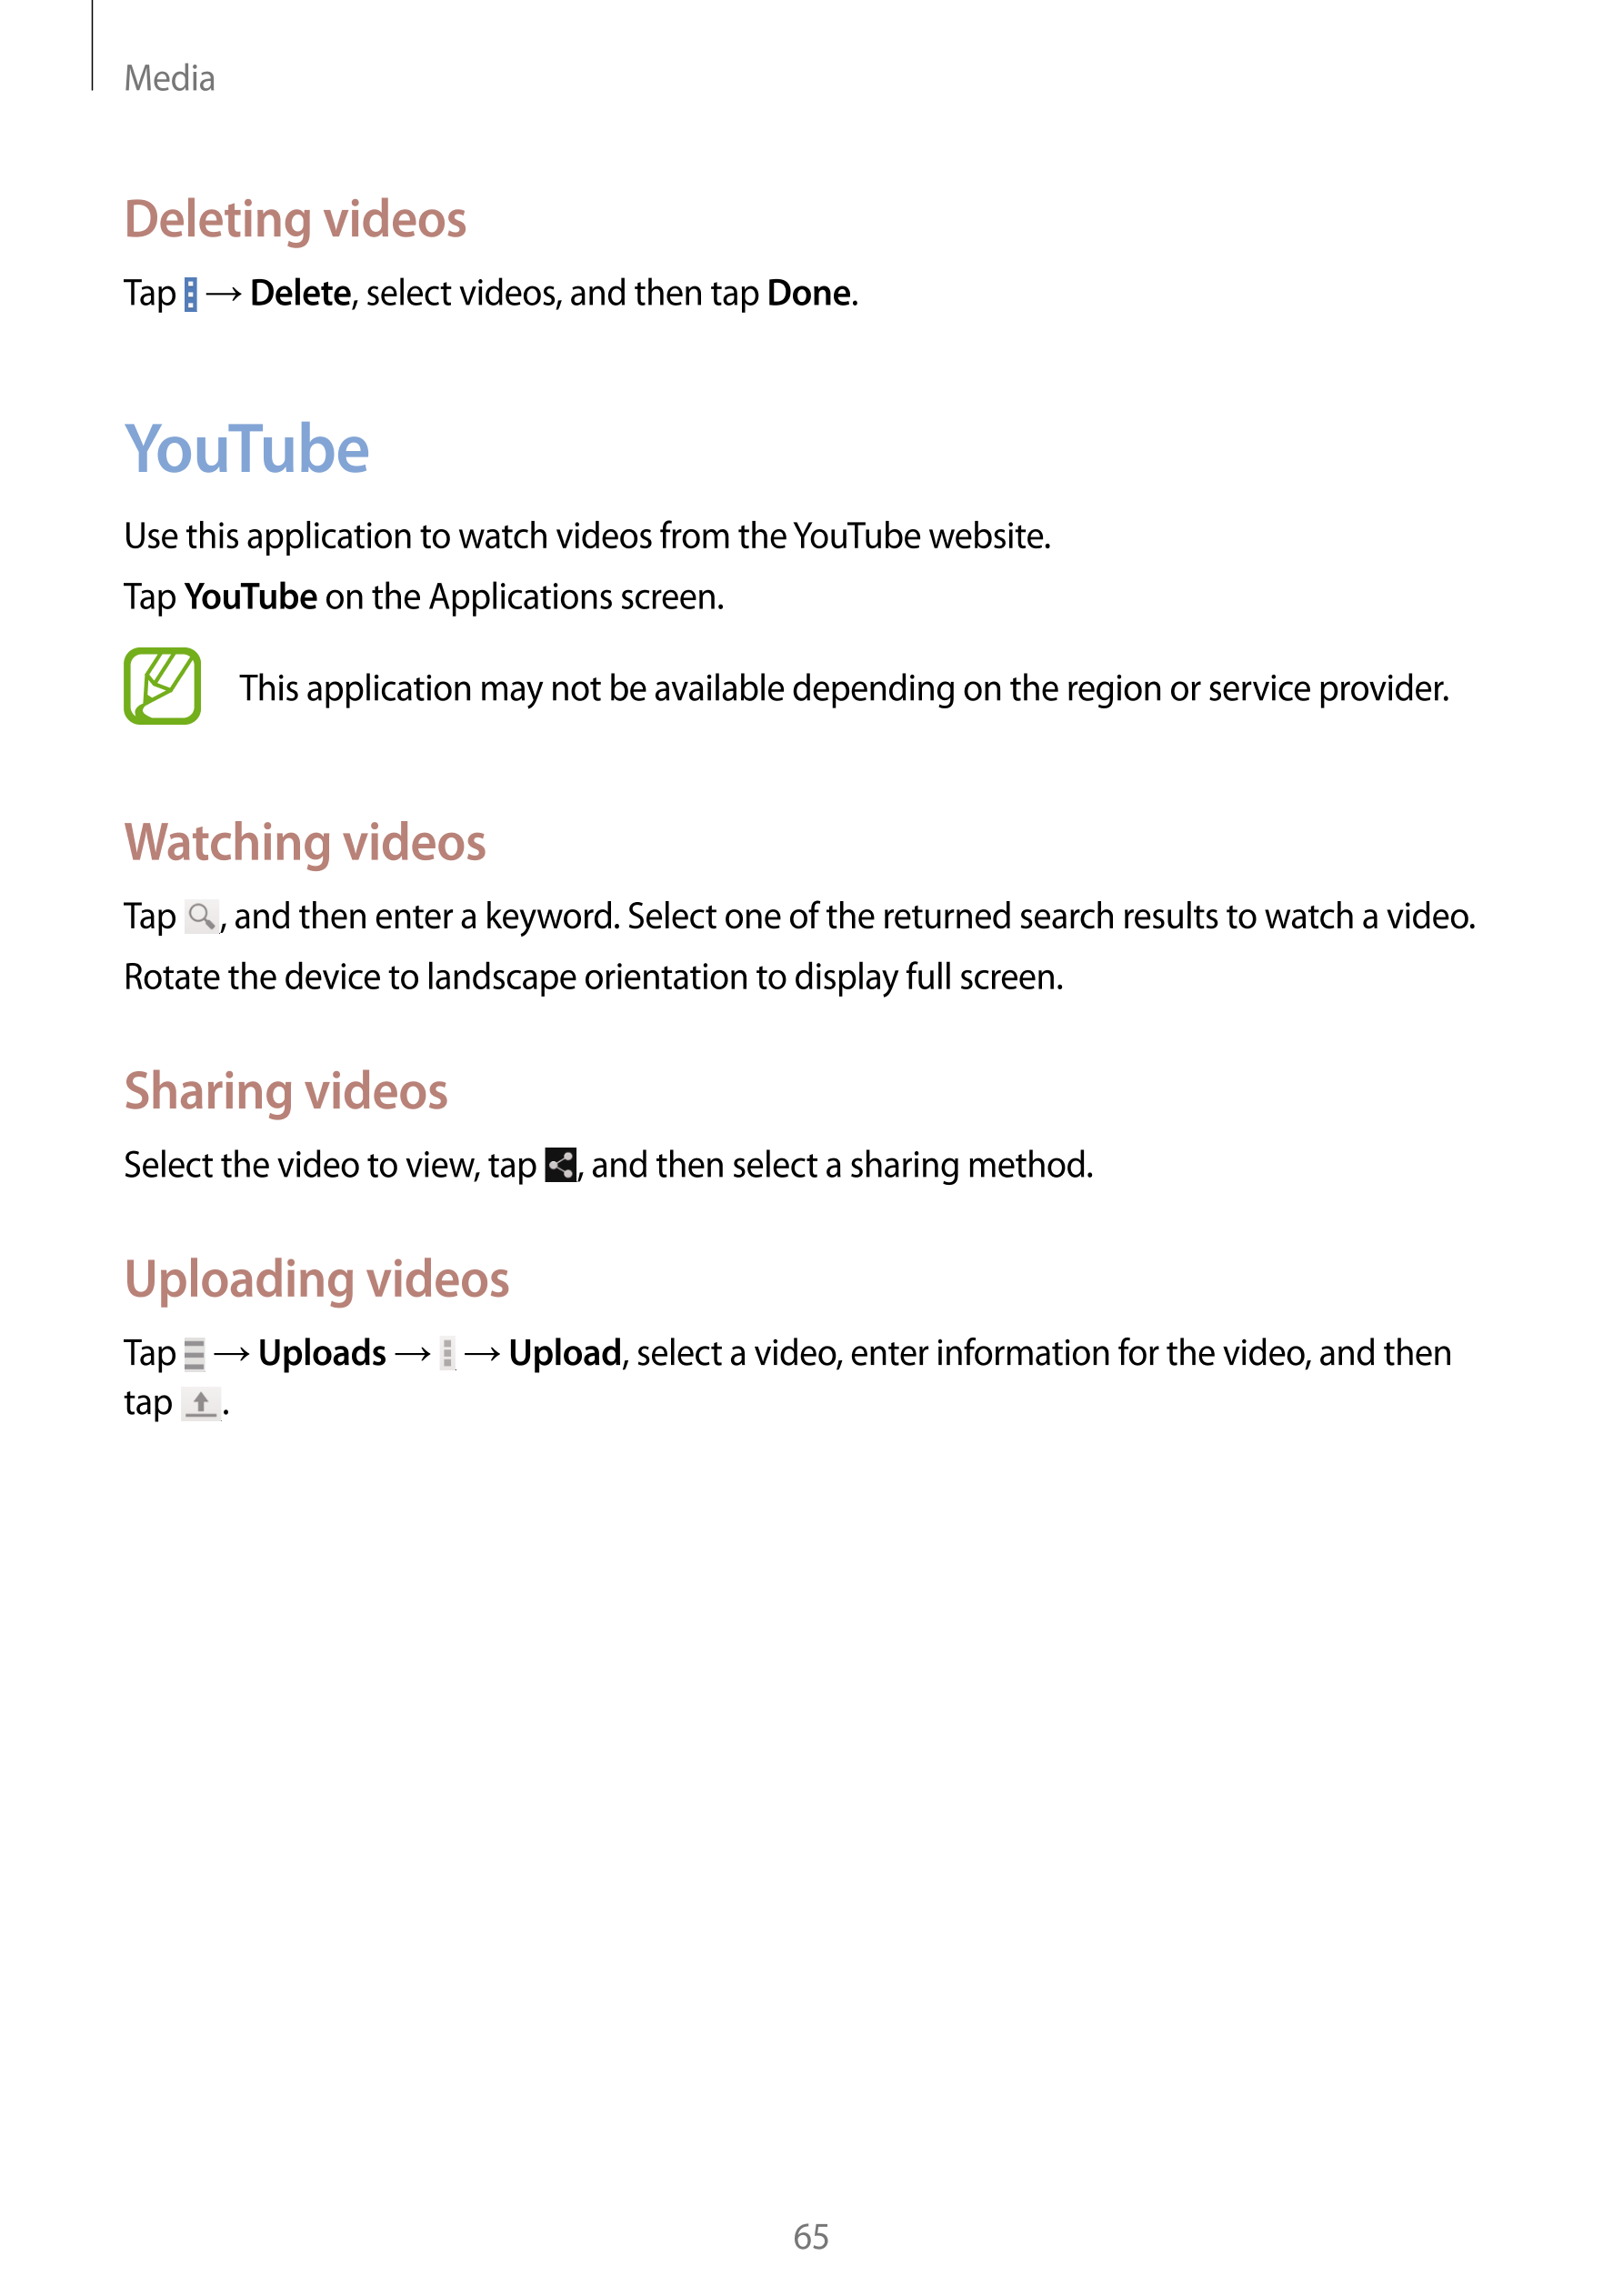 Media
Deleting videos
Tap    →  Delete, select videos, and then tap  Done.
YouTube
Use this application to watch videos from the